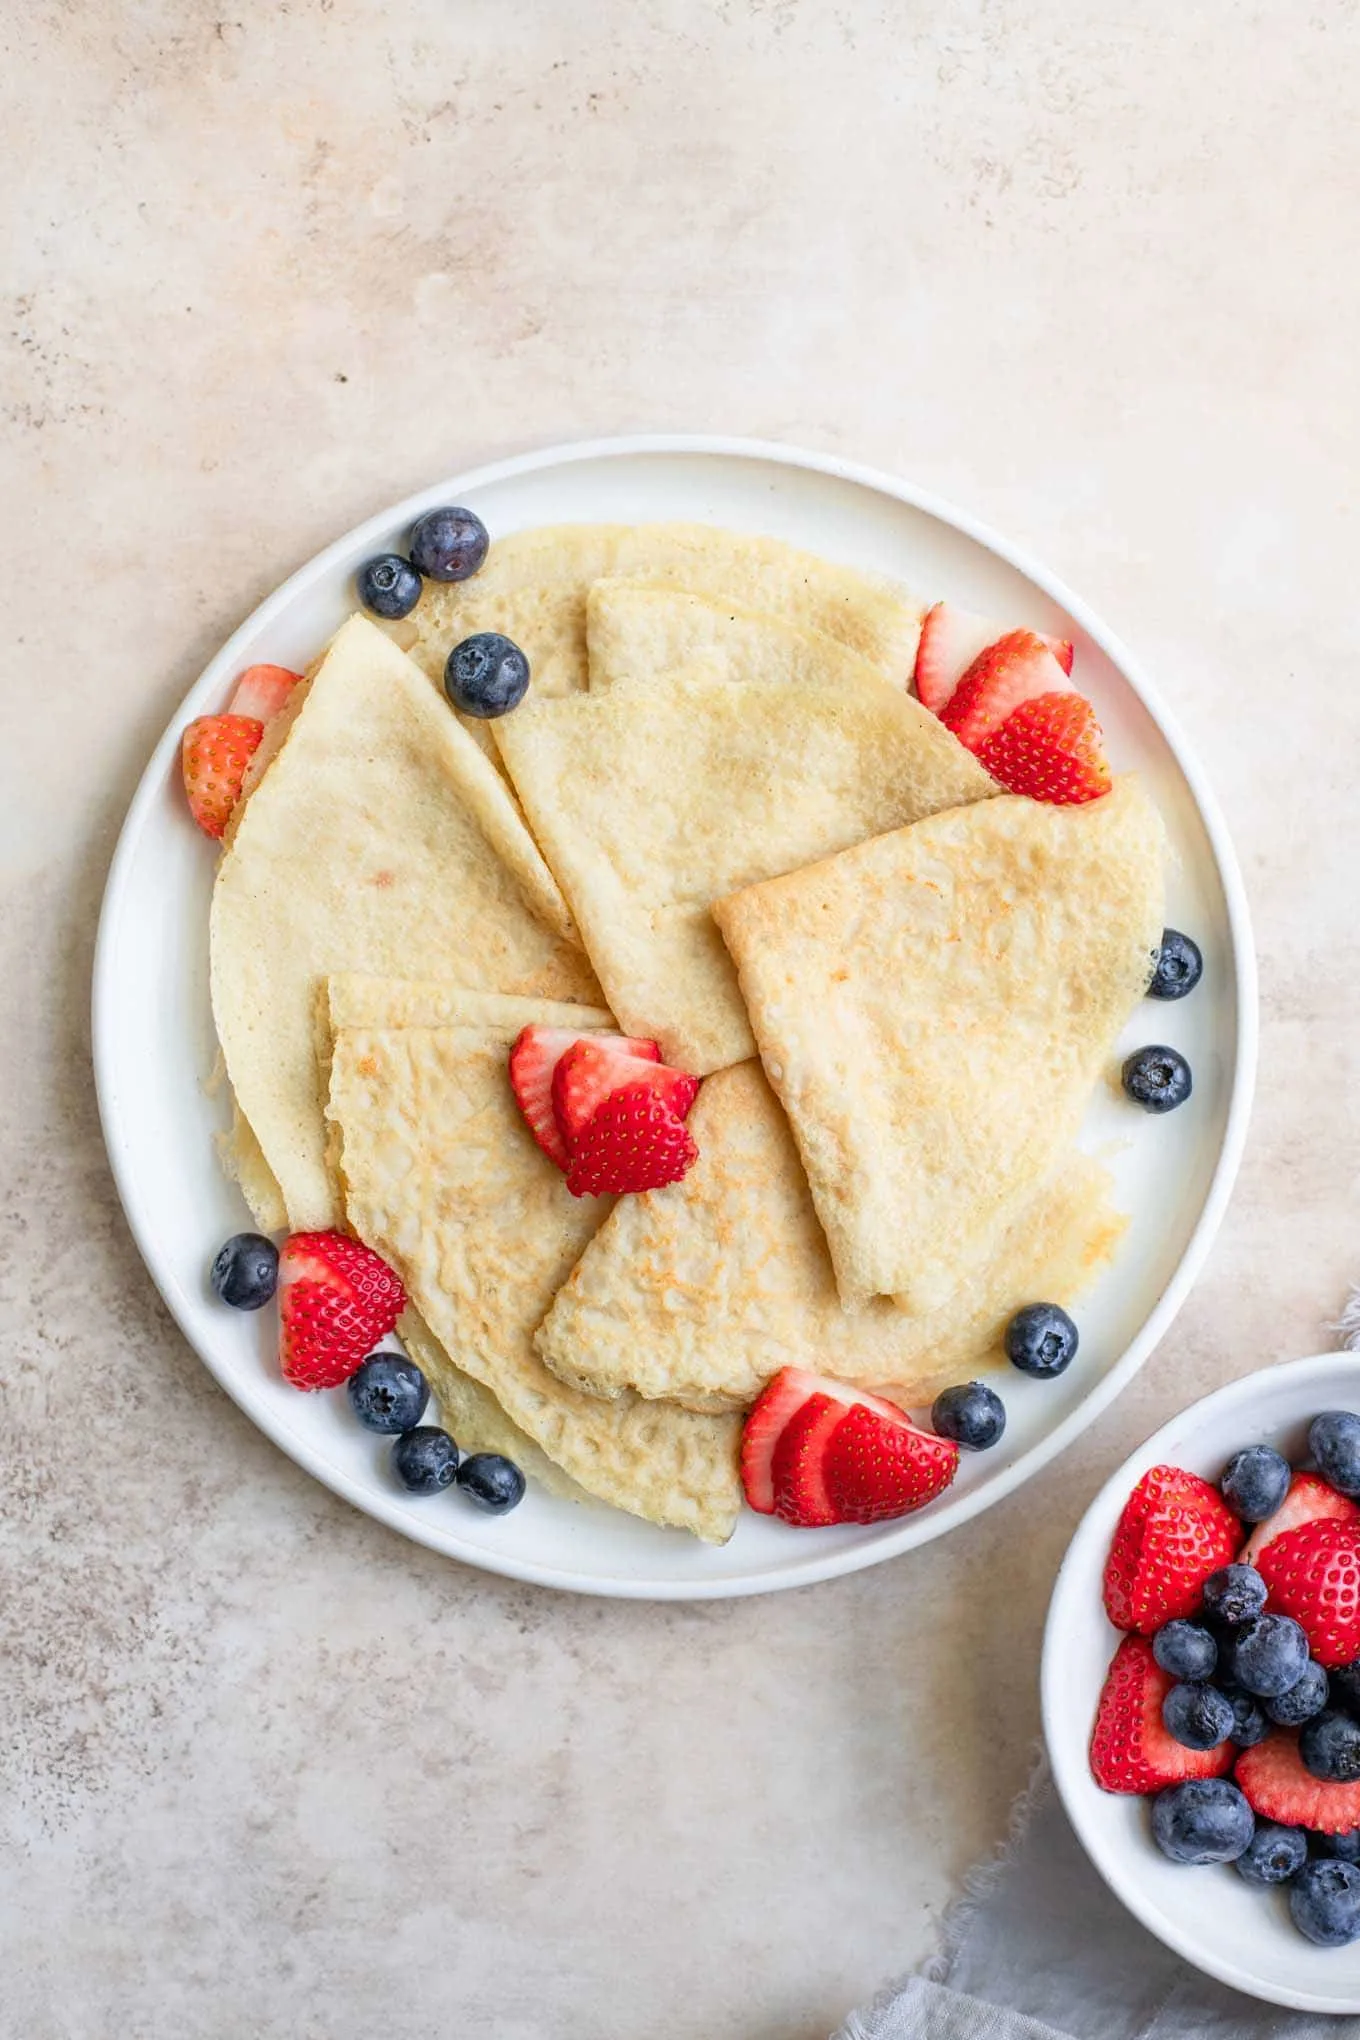 vegan crepes folded into quarters and served with fresh sliced strawberries and blueberries